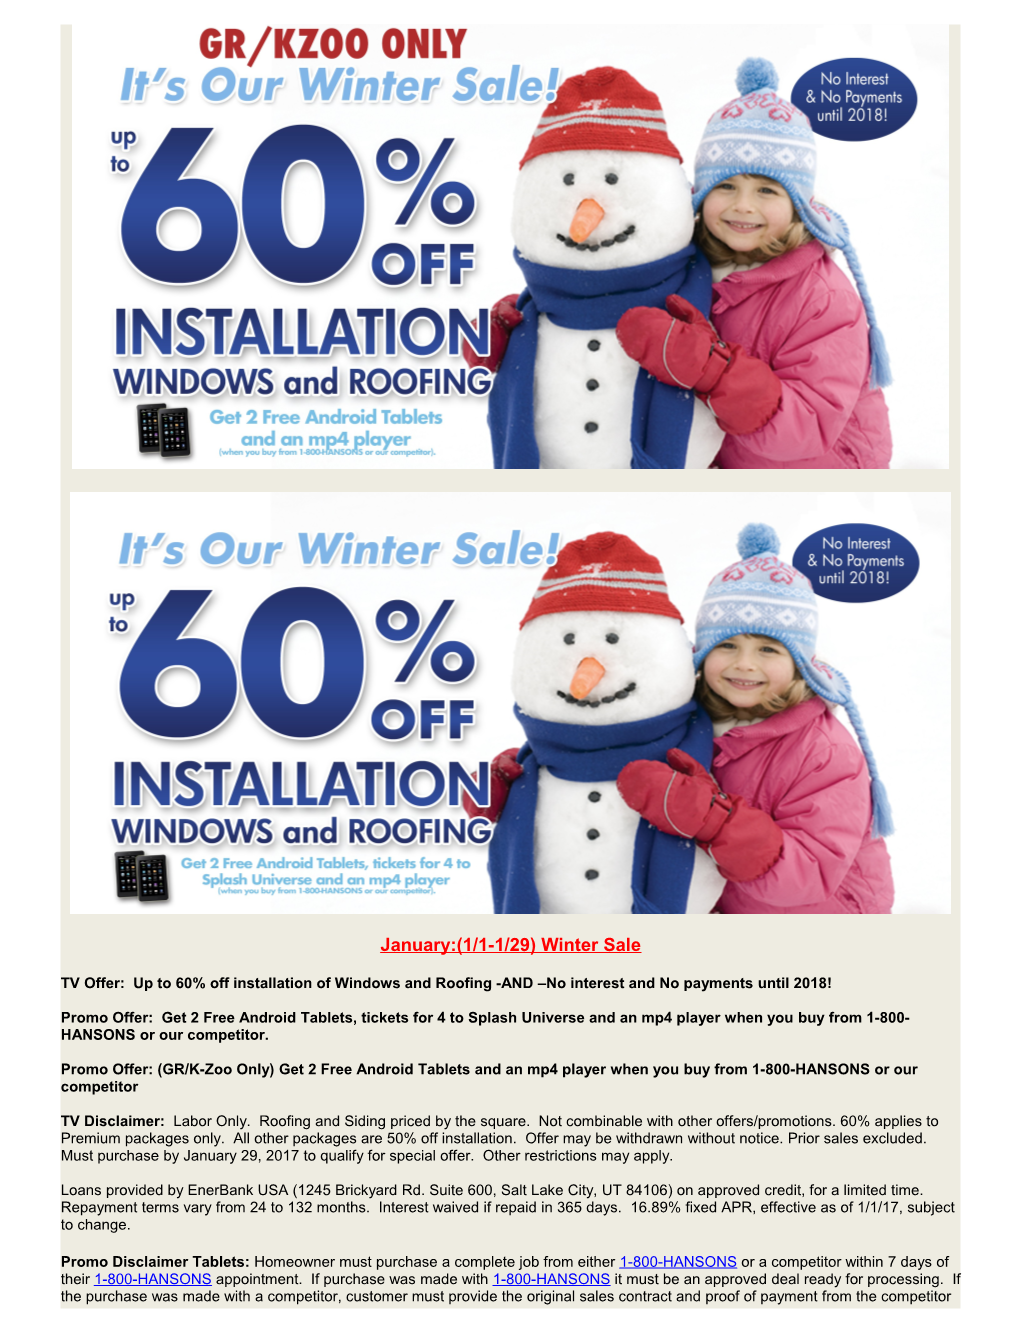 TV Offer: up to 60% Off Installation of Windows and Roofing -AND No Interest and No Payments